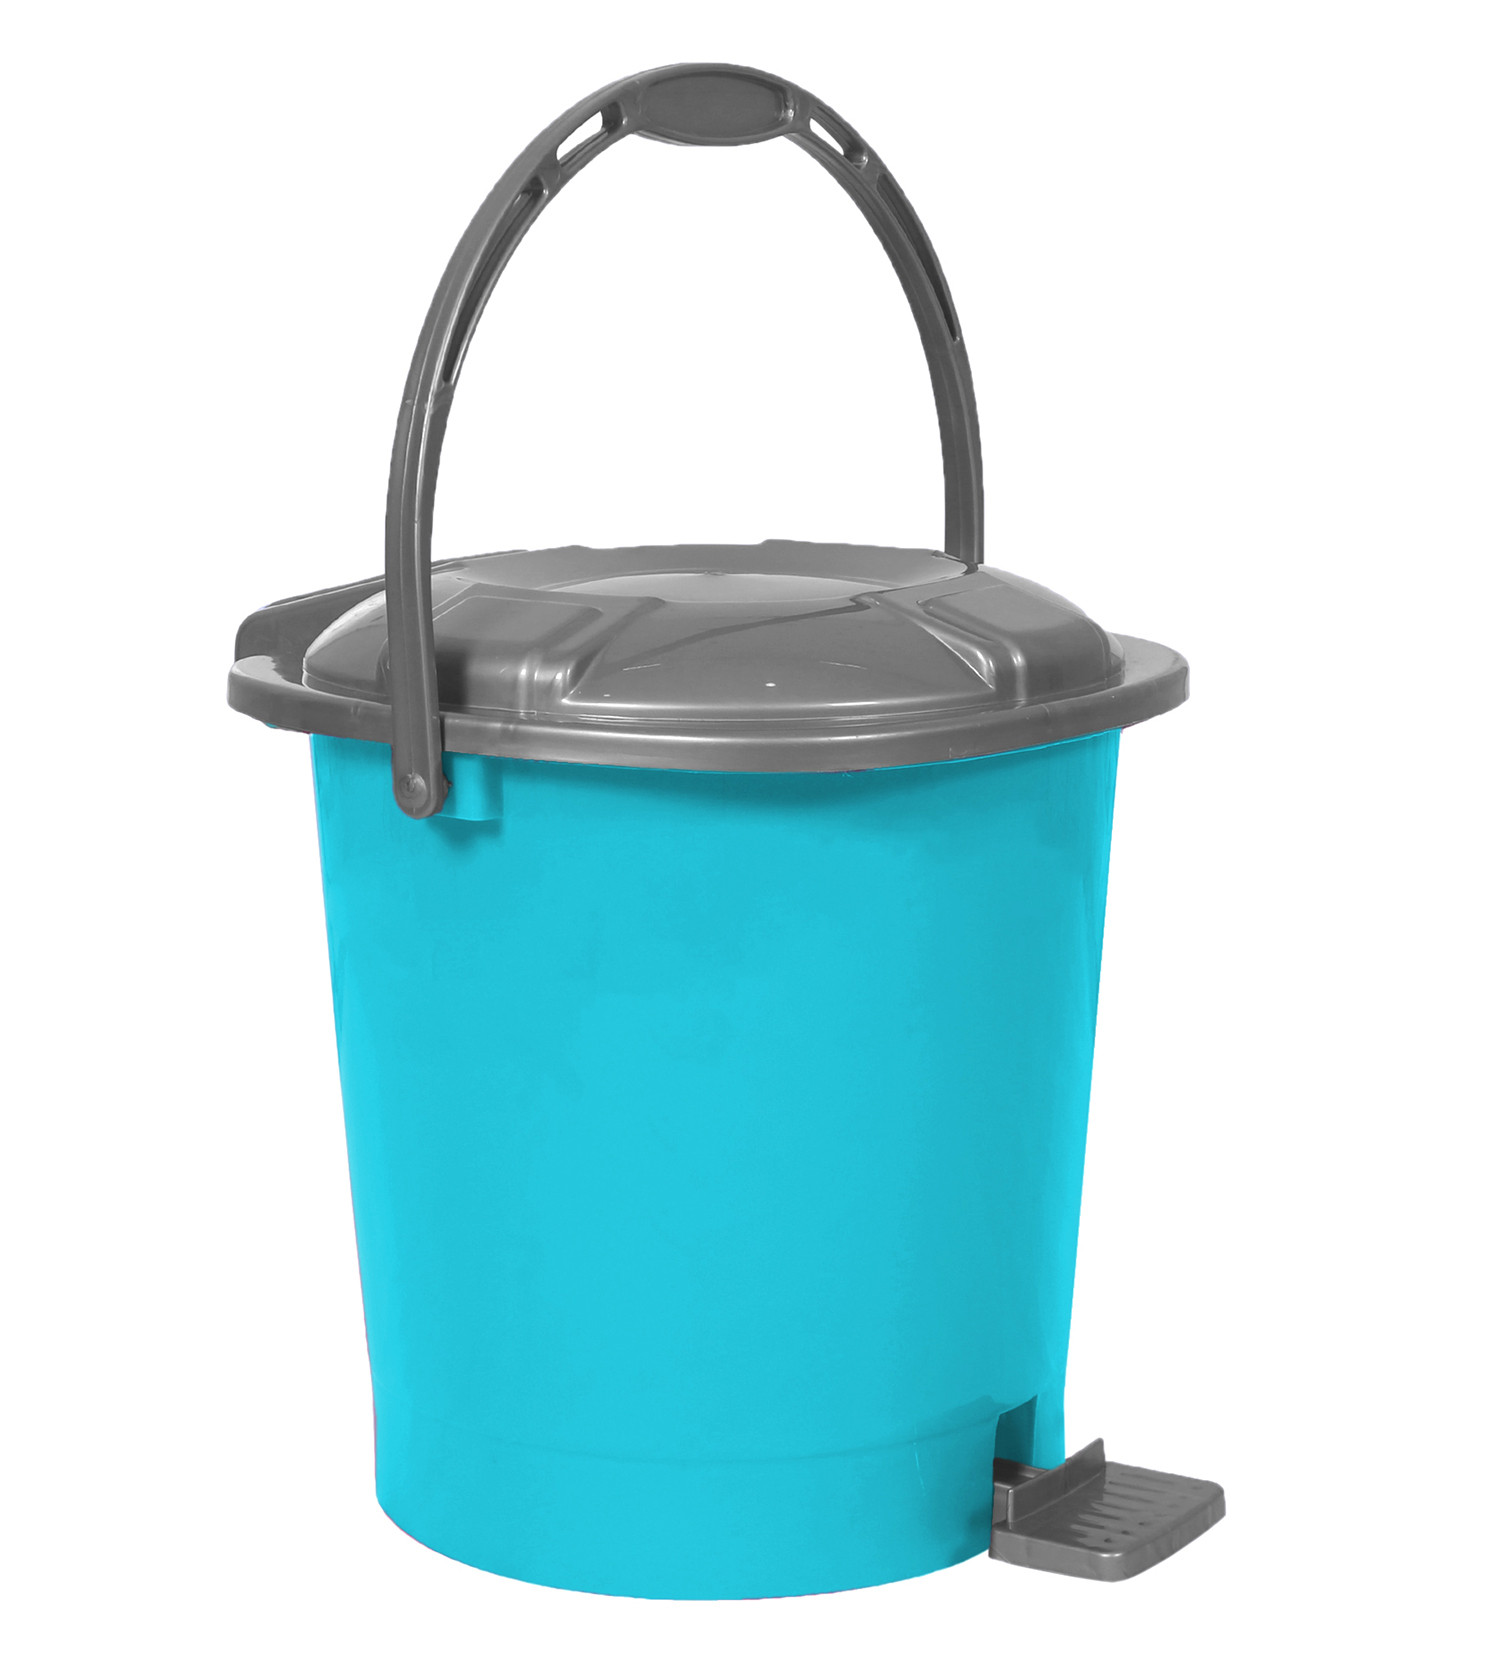 Kuber Industries Durable Plastic Pedal Dustbin|Waste Bin|Trash Can For Kitchen & Home With Handle,7 Litre (Sky Blue)